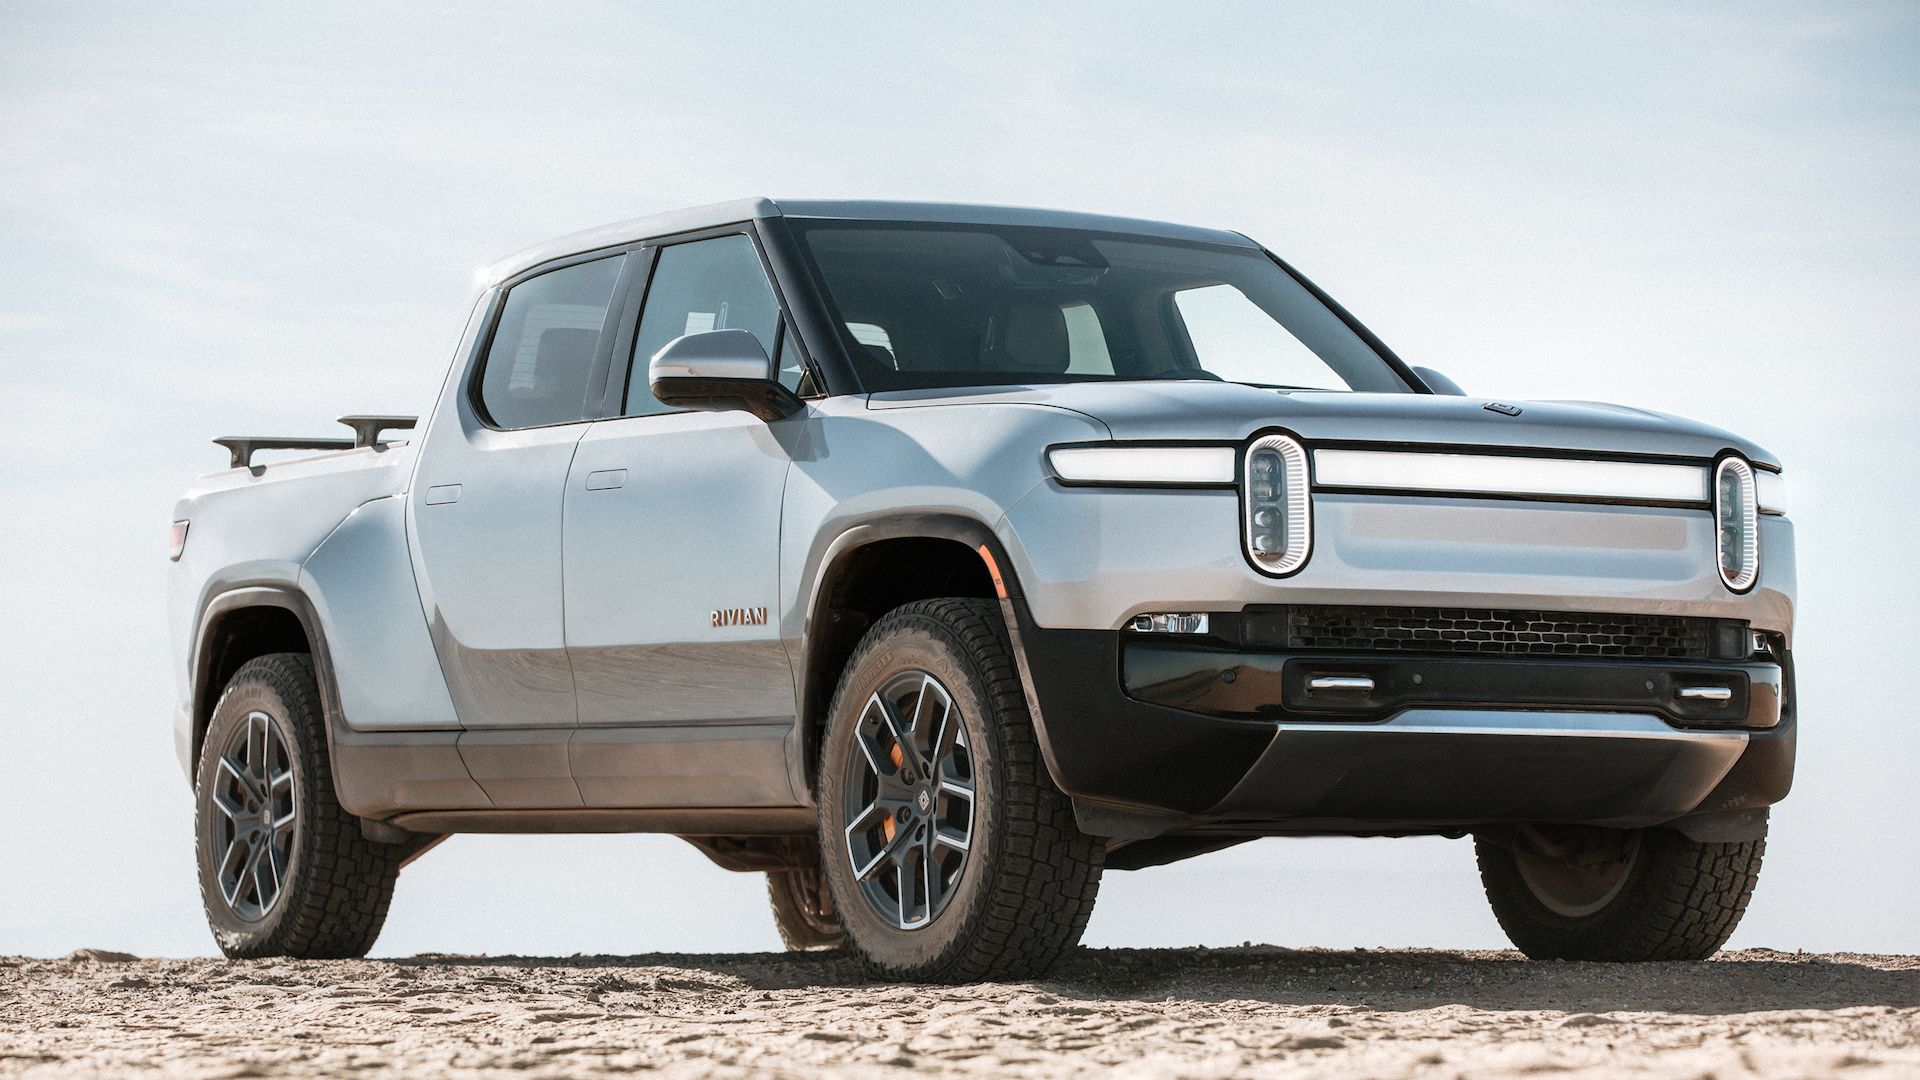 Photo of the Rivian R1T electric pickup truck